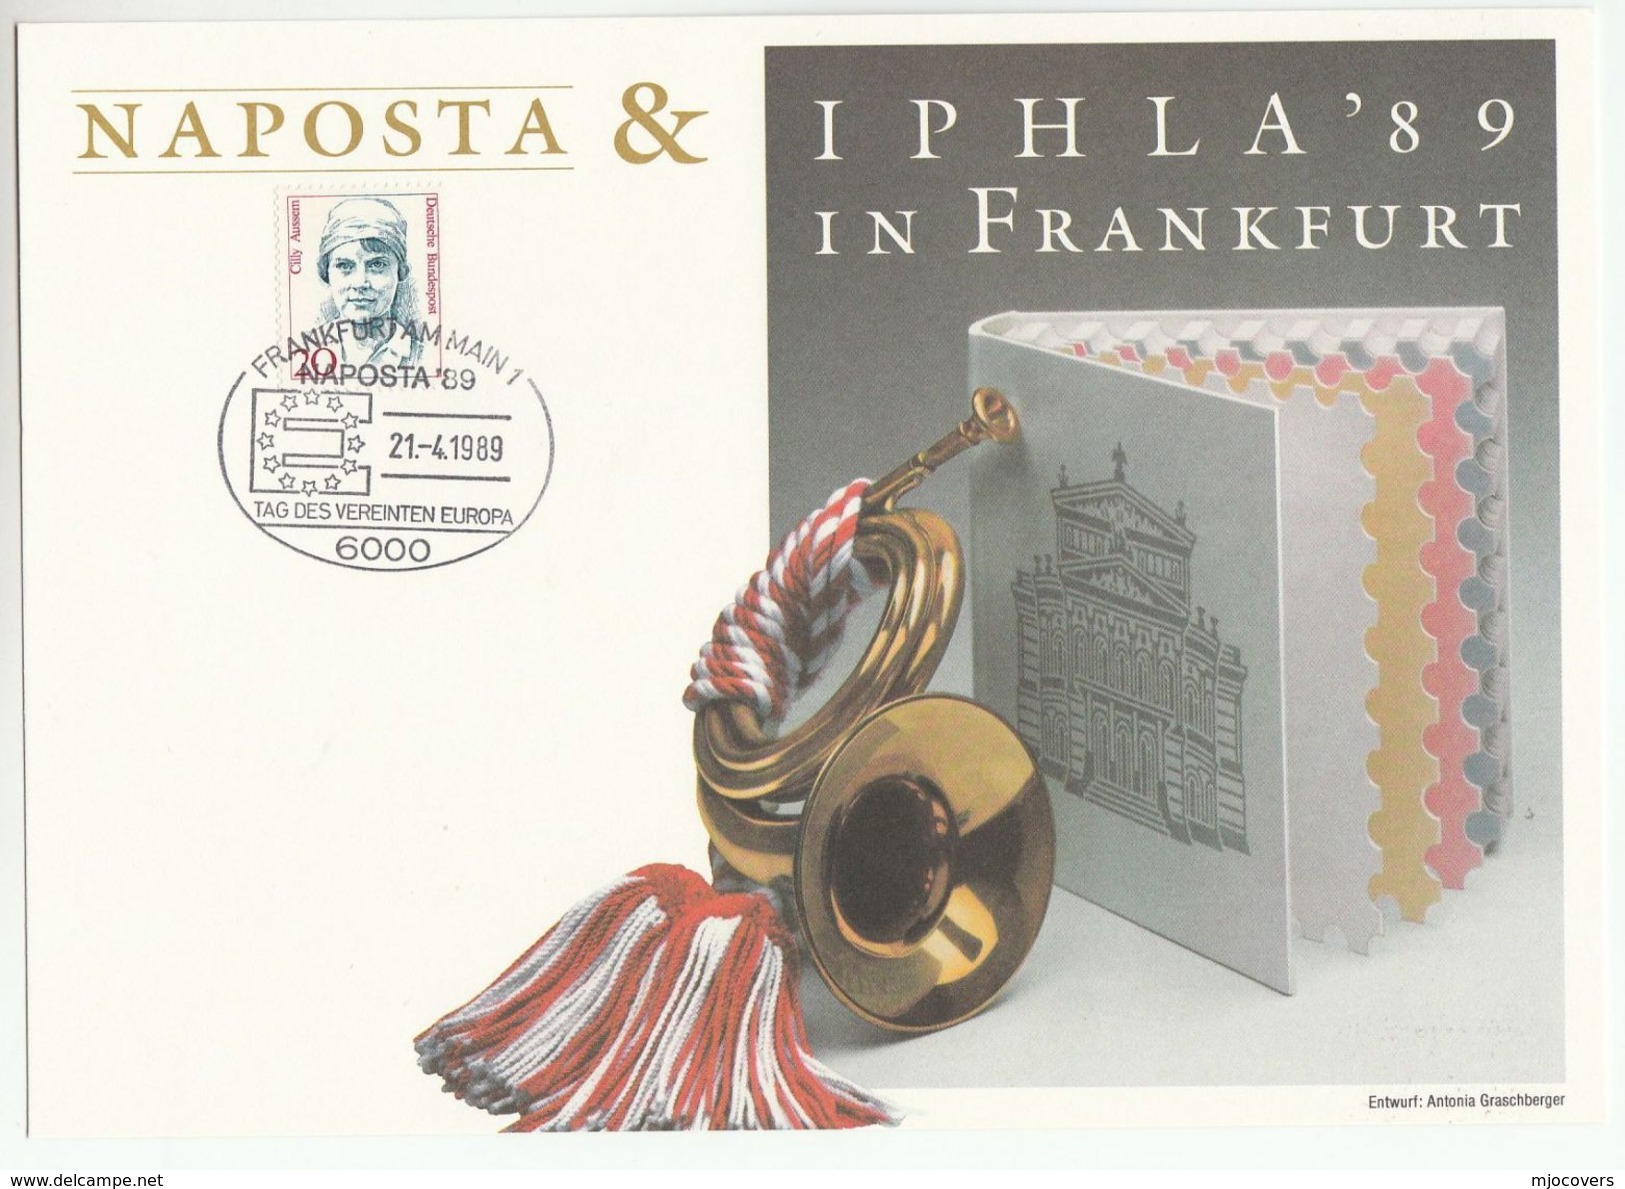 1989 NAPOSTA 'UNITED EUROPE' DAY  EVENT COVER Card GERMANY Philatelic Exhibition, European Community Stamps - Europese Instellingen